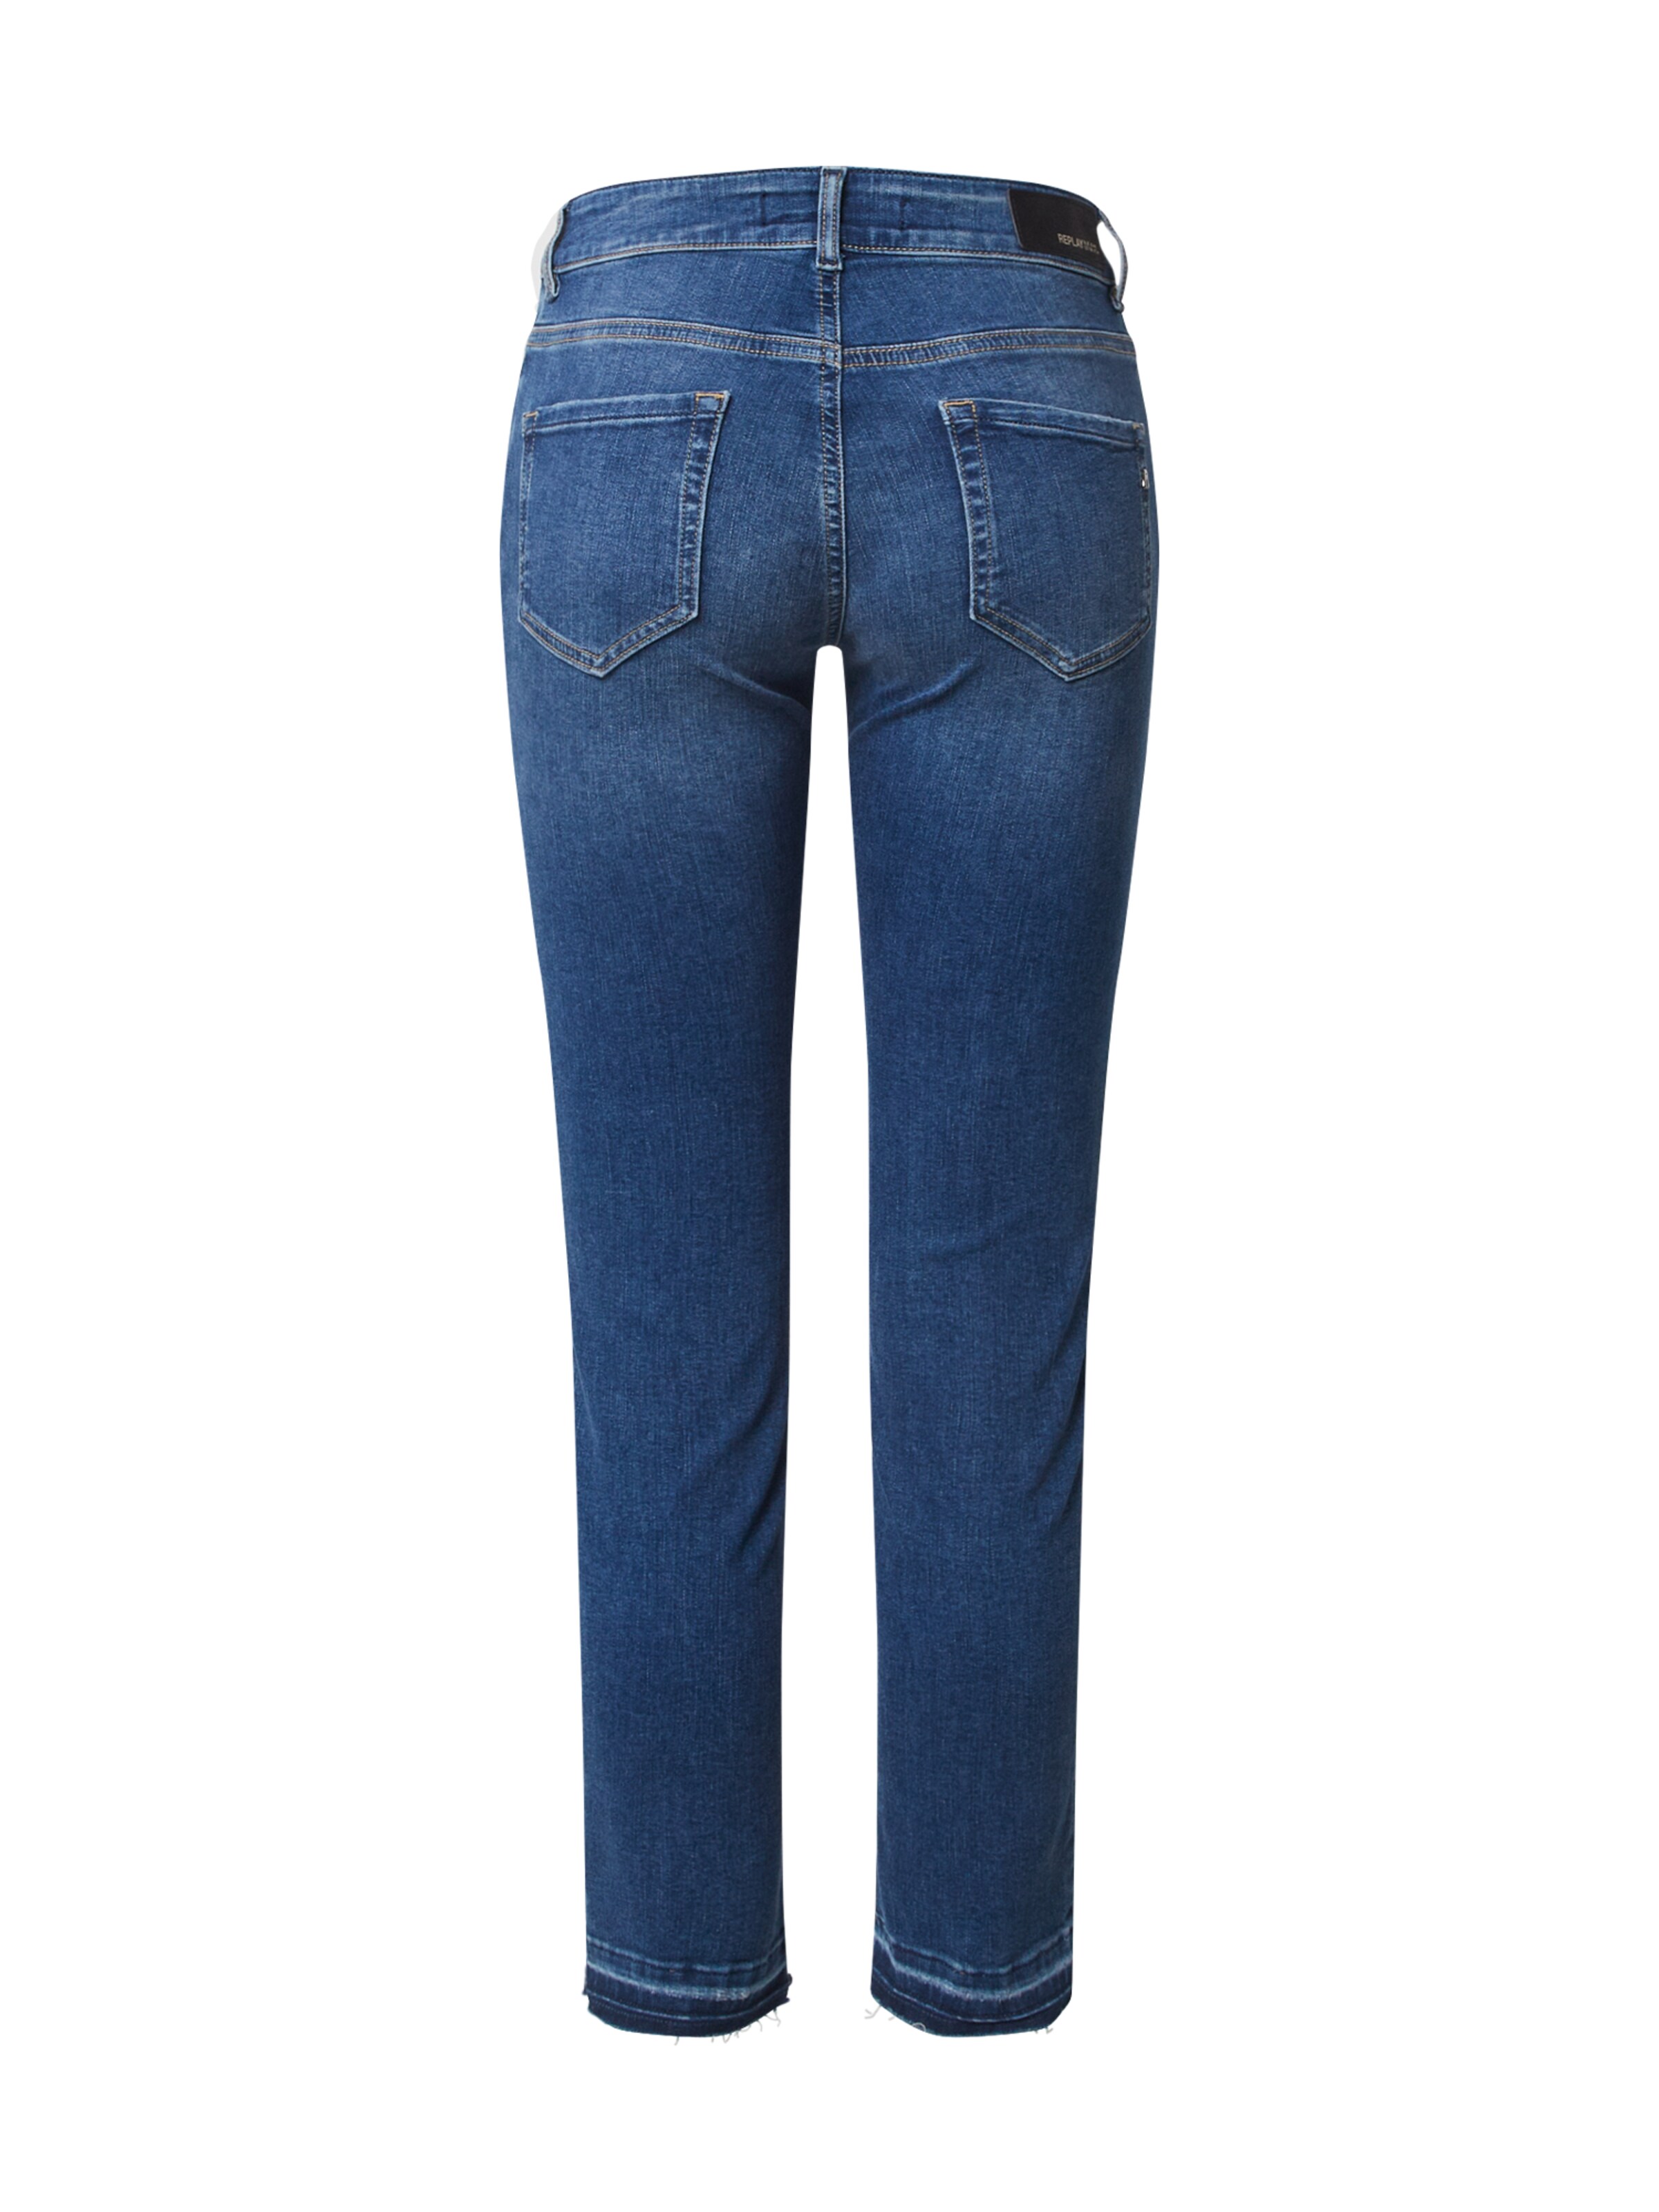 REPLAY Jeans Faaby in Blau 